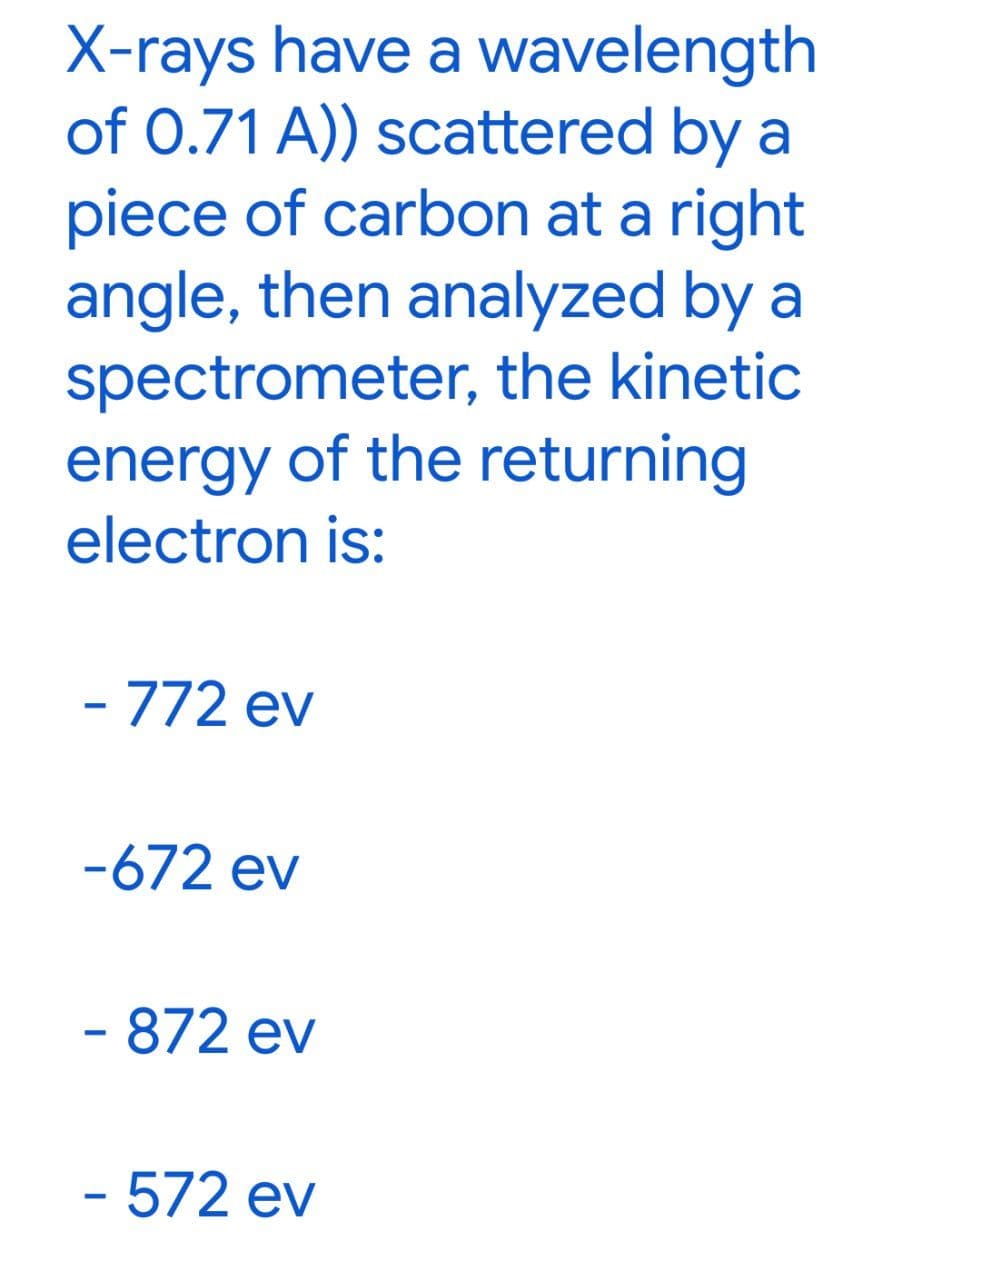 X-rays have a wavelength
of 0.71 A)) scattered by a
piece of carbon at a right
angle, then analyzed by a
spectrometer, the kinetic
energy of the returning
electron is:
- 772 ev
-672 ev
- 872 ev
- 572 ev